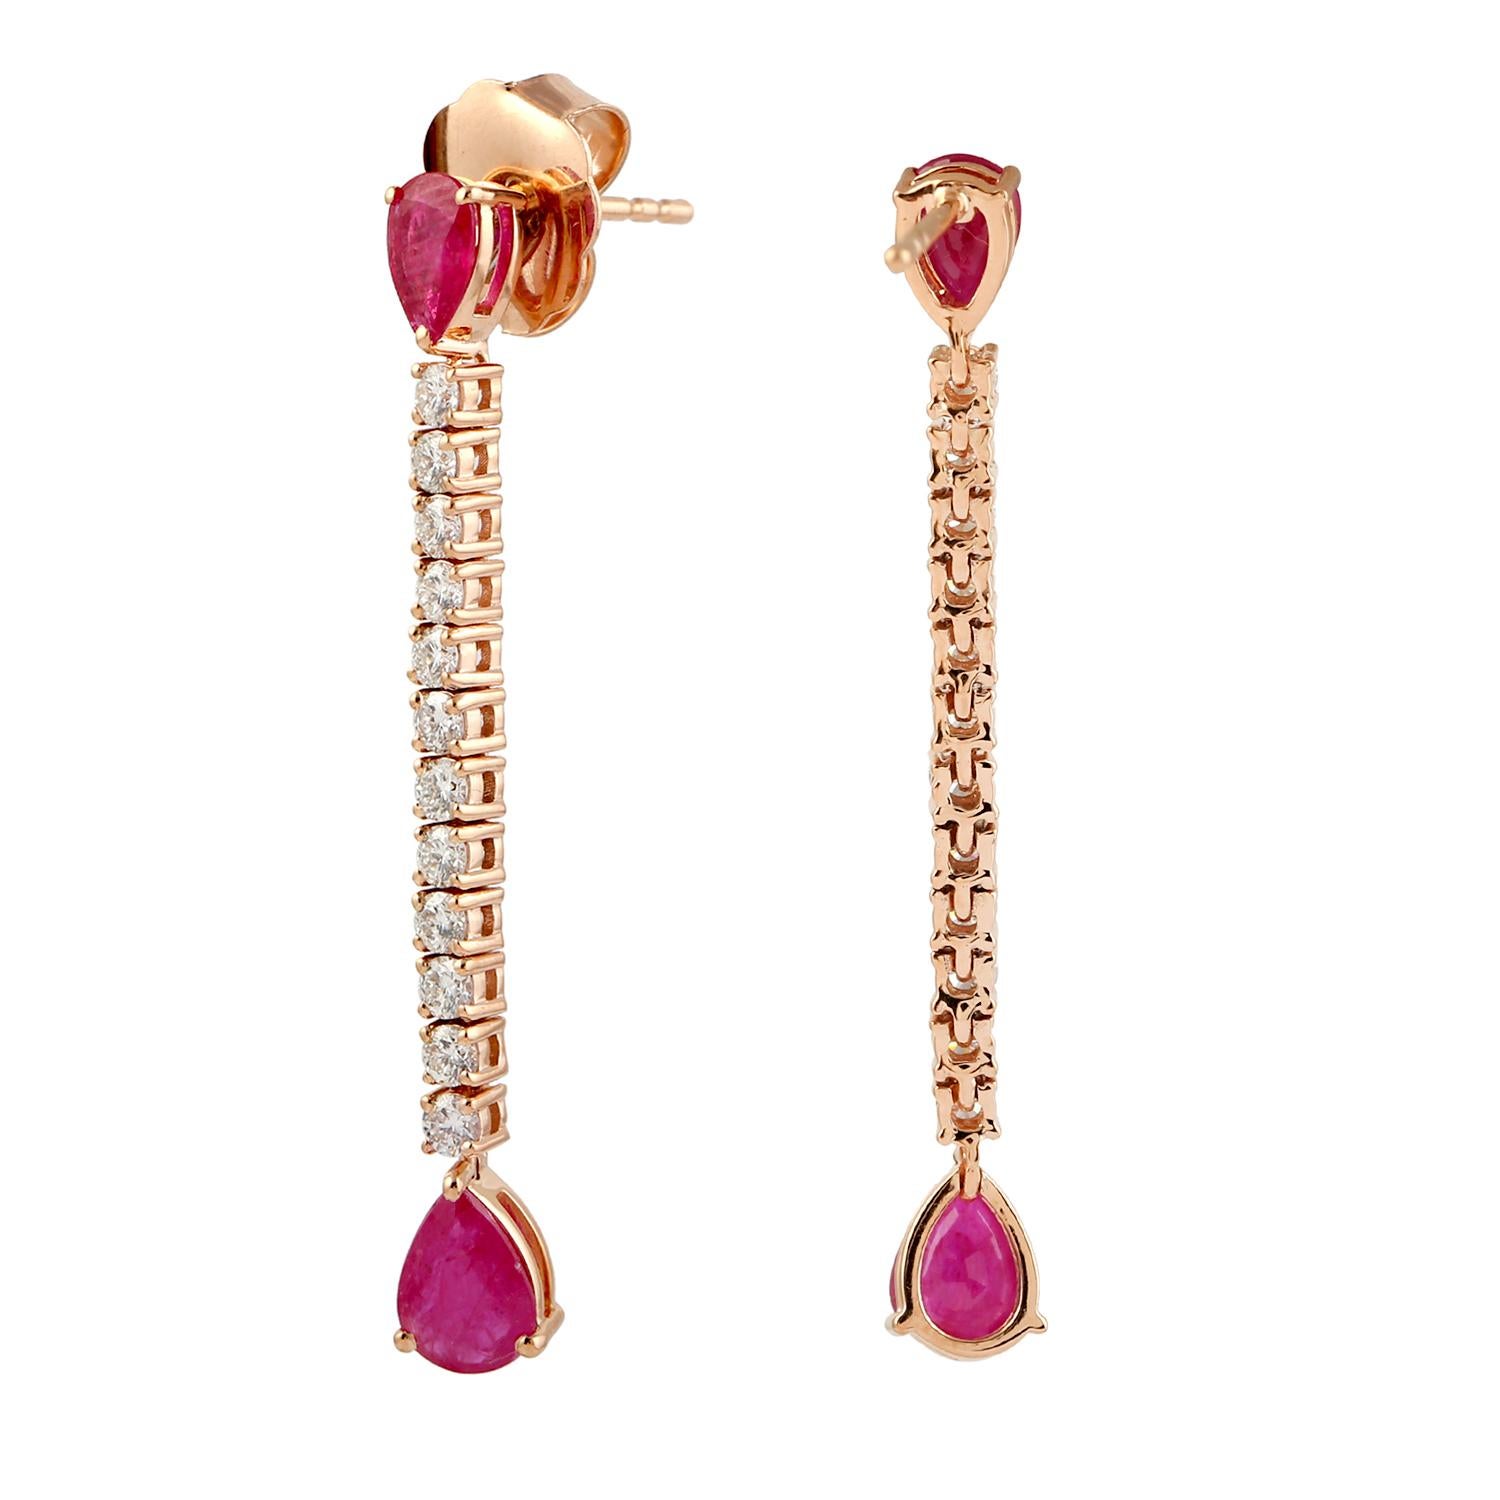 Contemporary Pear Shaped Ruby Chain Earrings With Diamonds Made In 18k Gold For Sale